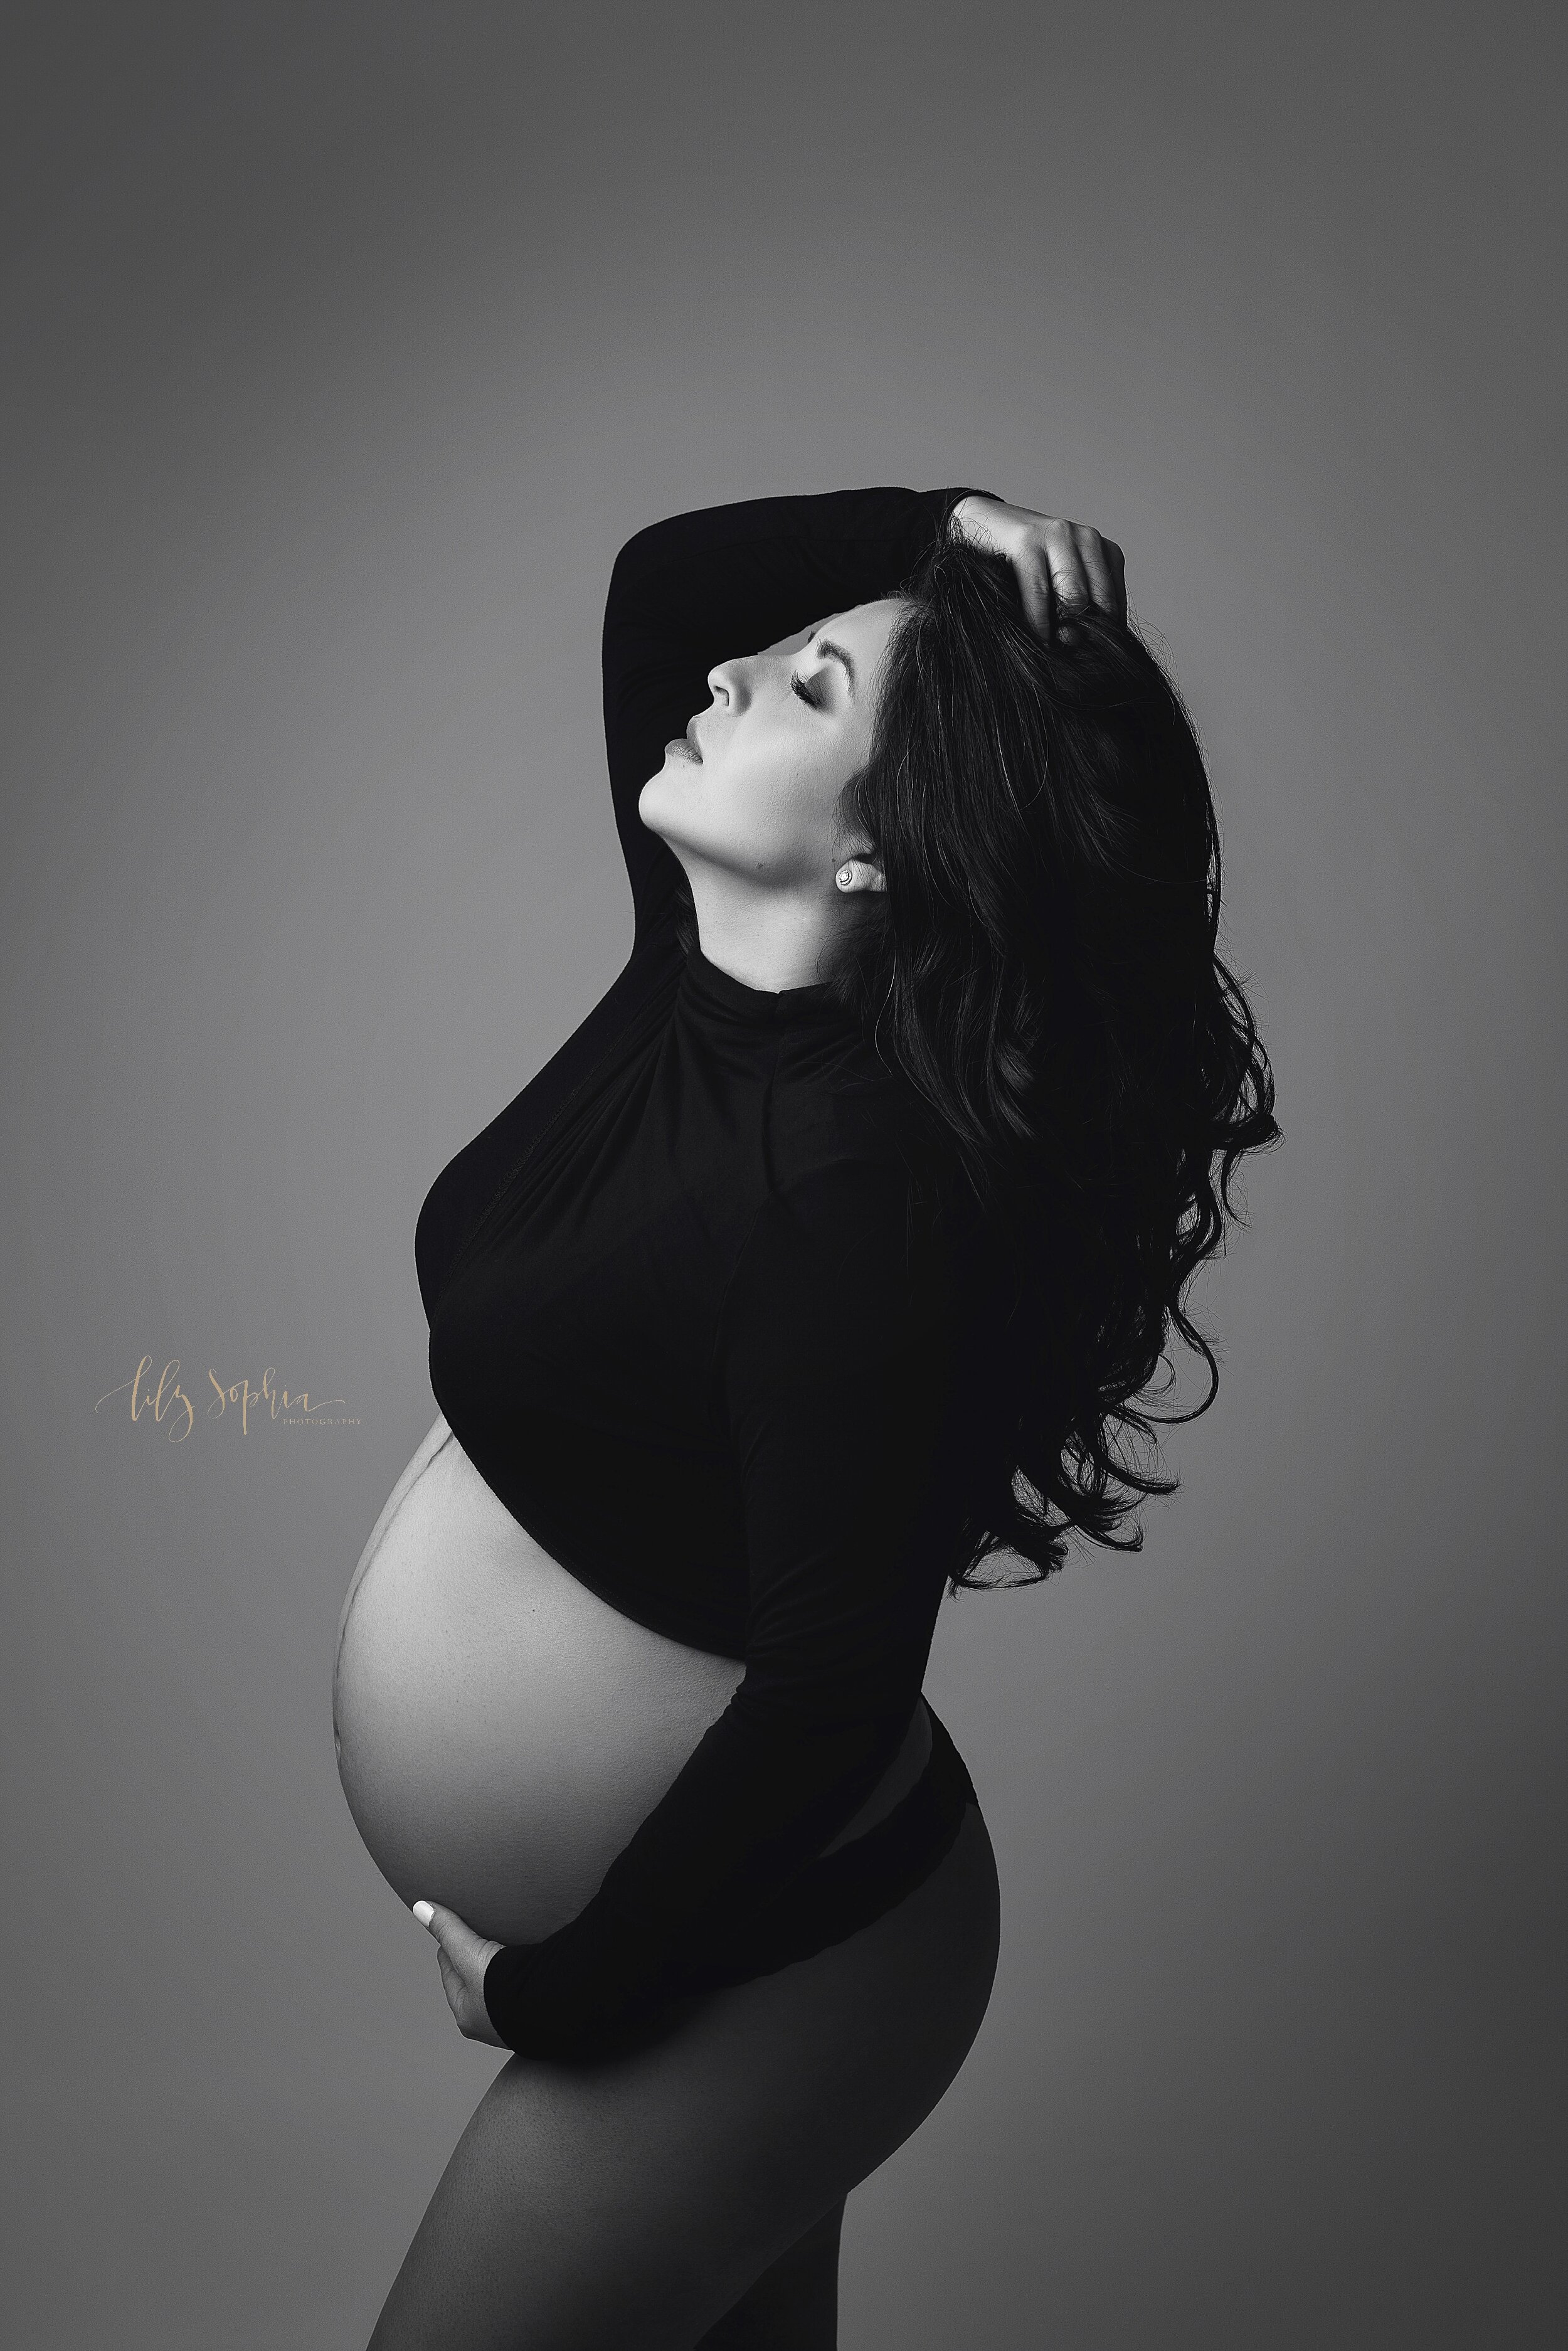  A stunning black and white portrait taken in Atlanta, Georgia of a pregnant Hispanic woman wearing a black long sleeved crop top while running her fingers through her long hair.  